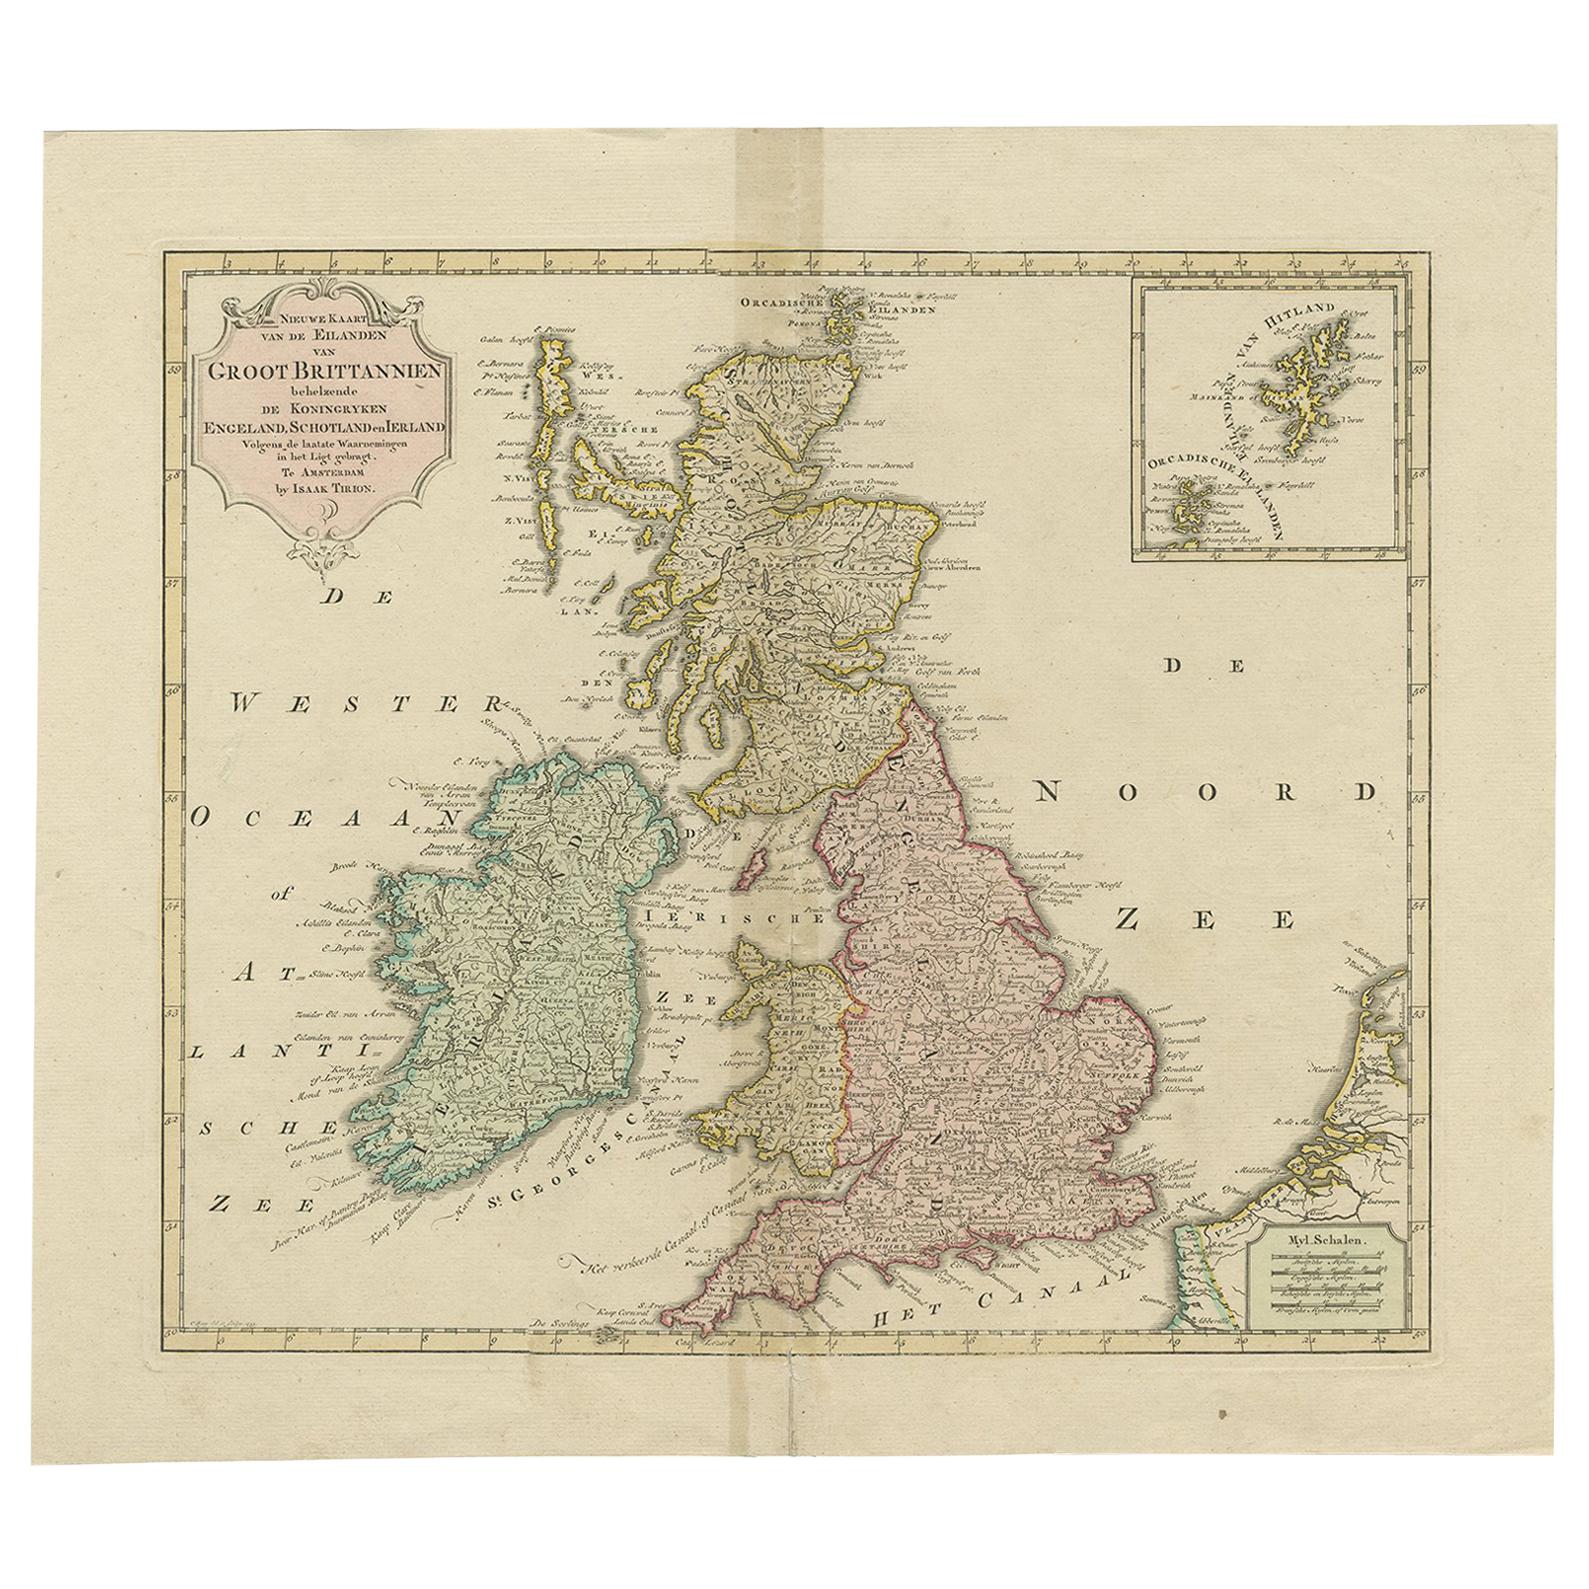 Antique Map of Great Britain and Ireland by Tirion, circa 1750